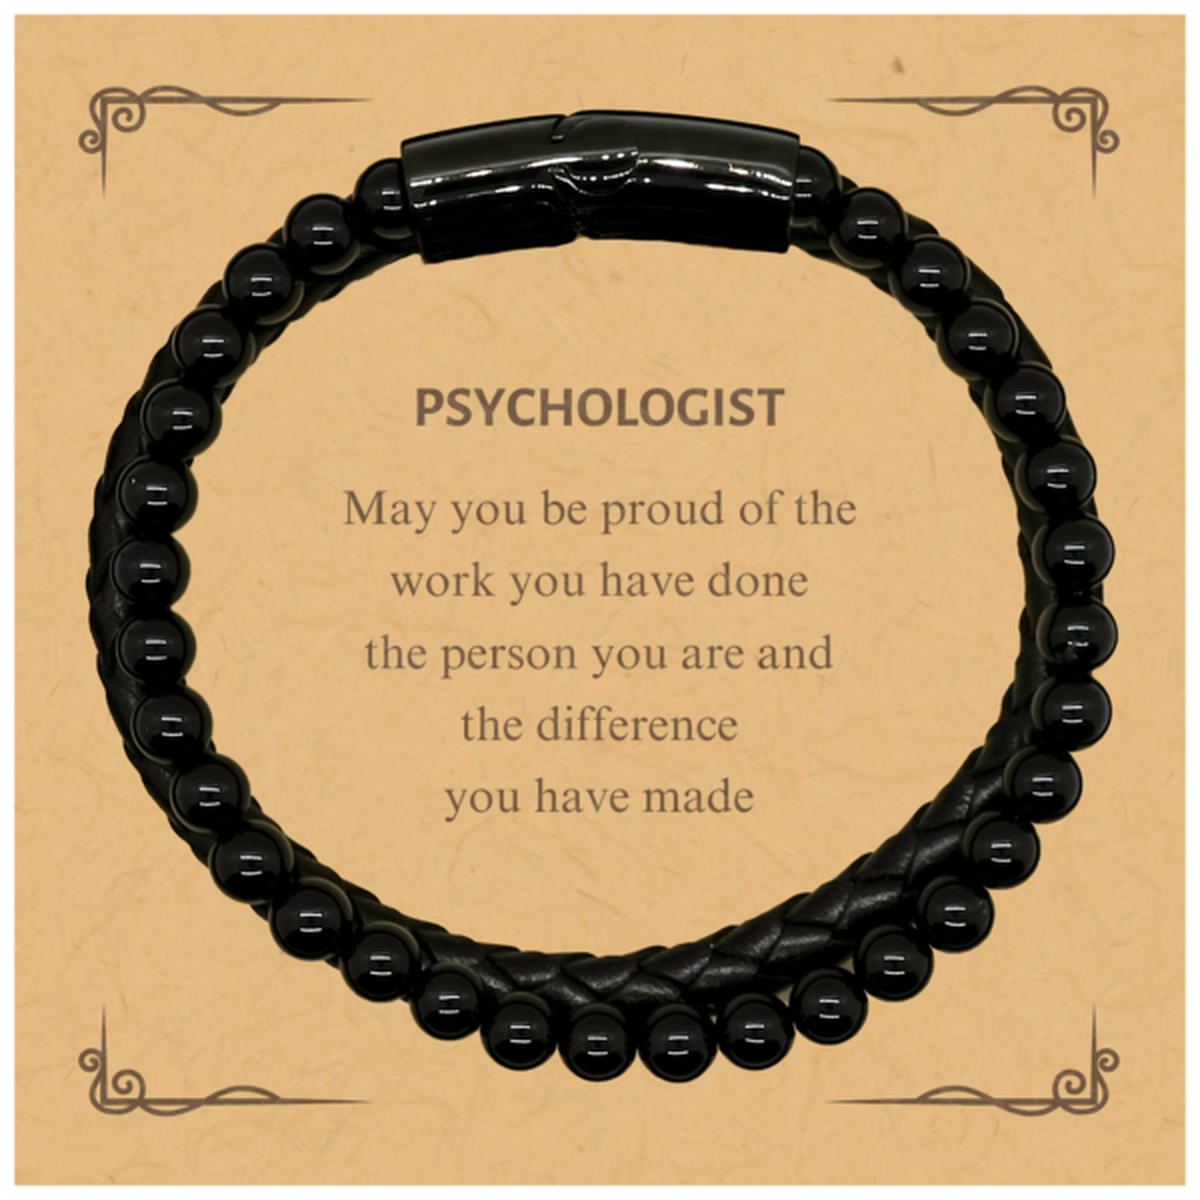 Psychologist May you be proud of the work you have done, Retirement Psychologist Stone Leather Bracelets for Colleague Appreciation Gifts Amazing for Psychologist